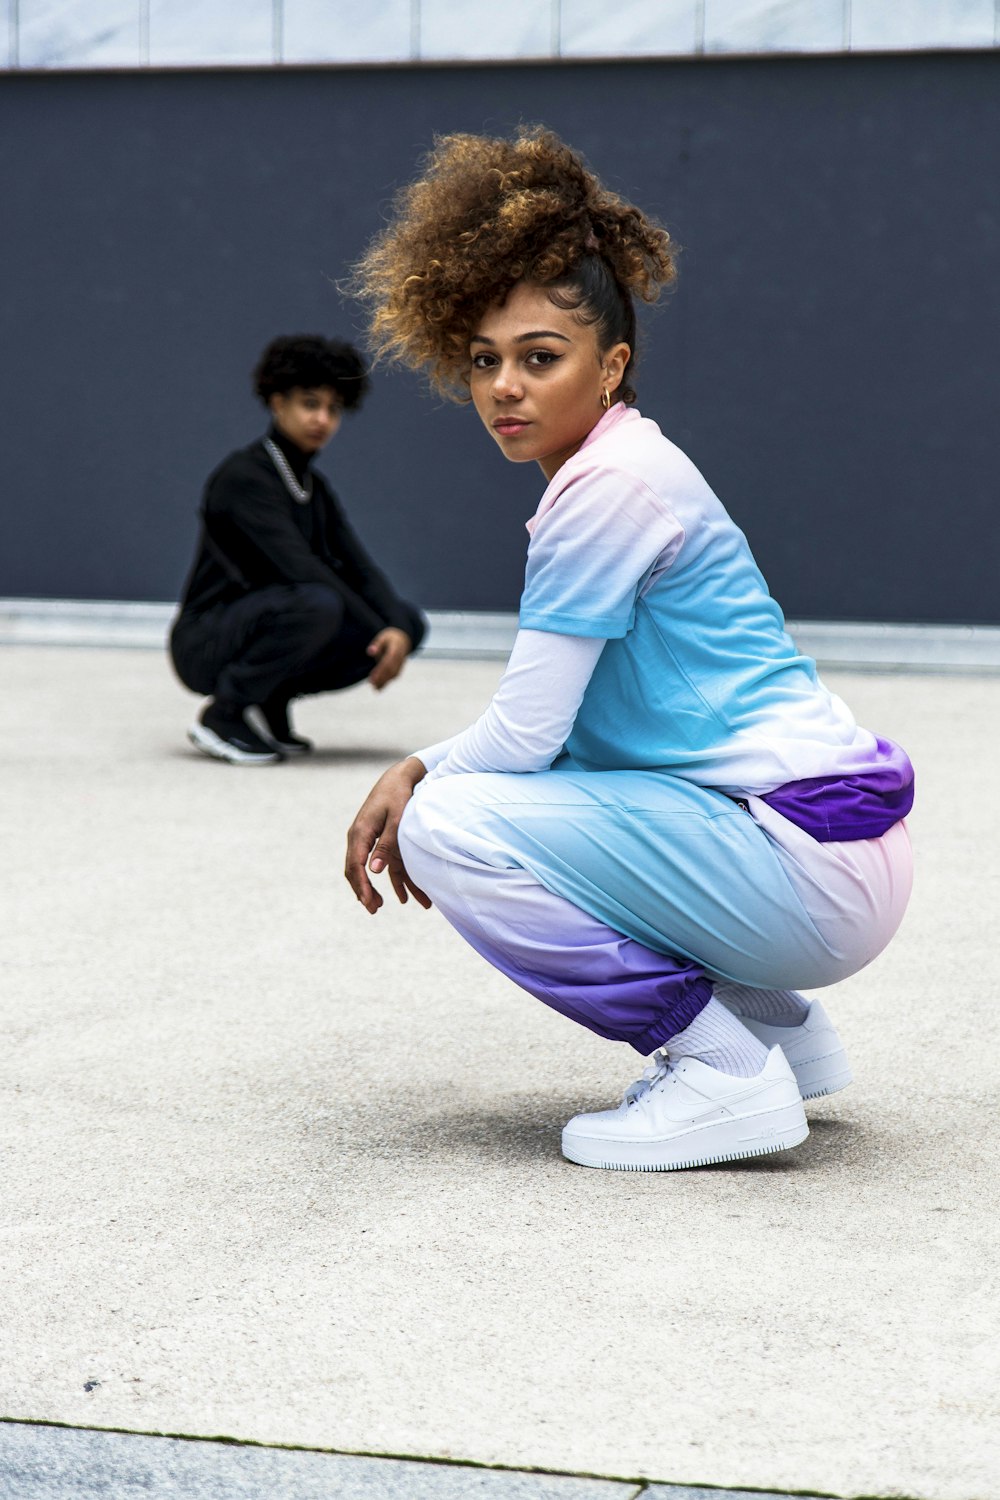 woman in white long sleeve shirt and purple pants sitting on gray concrete floor